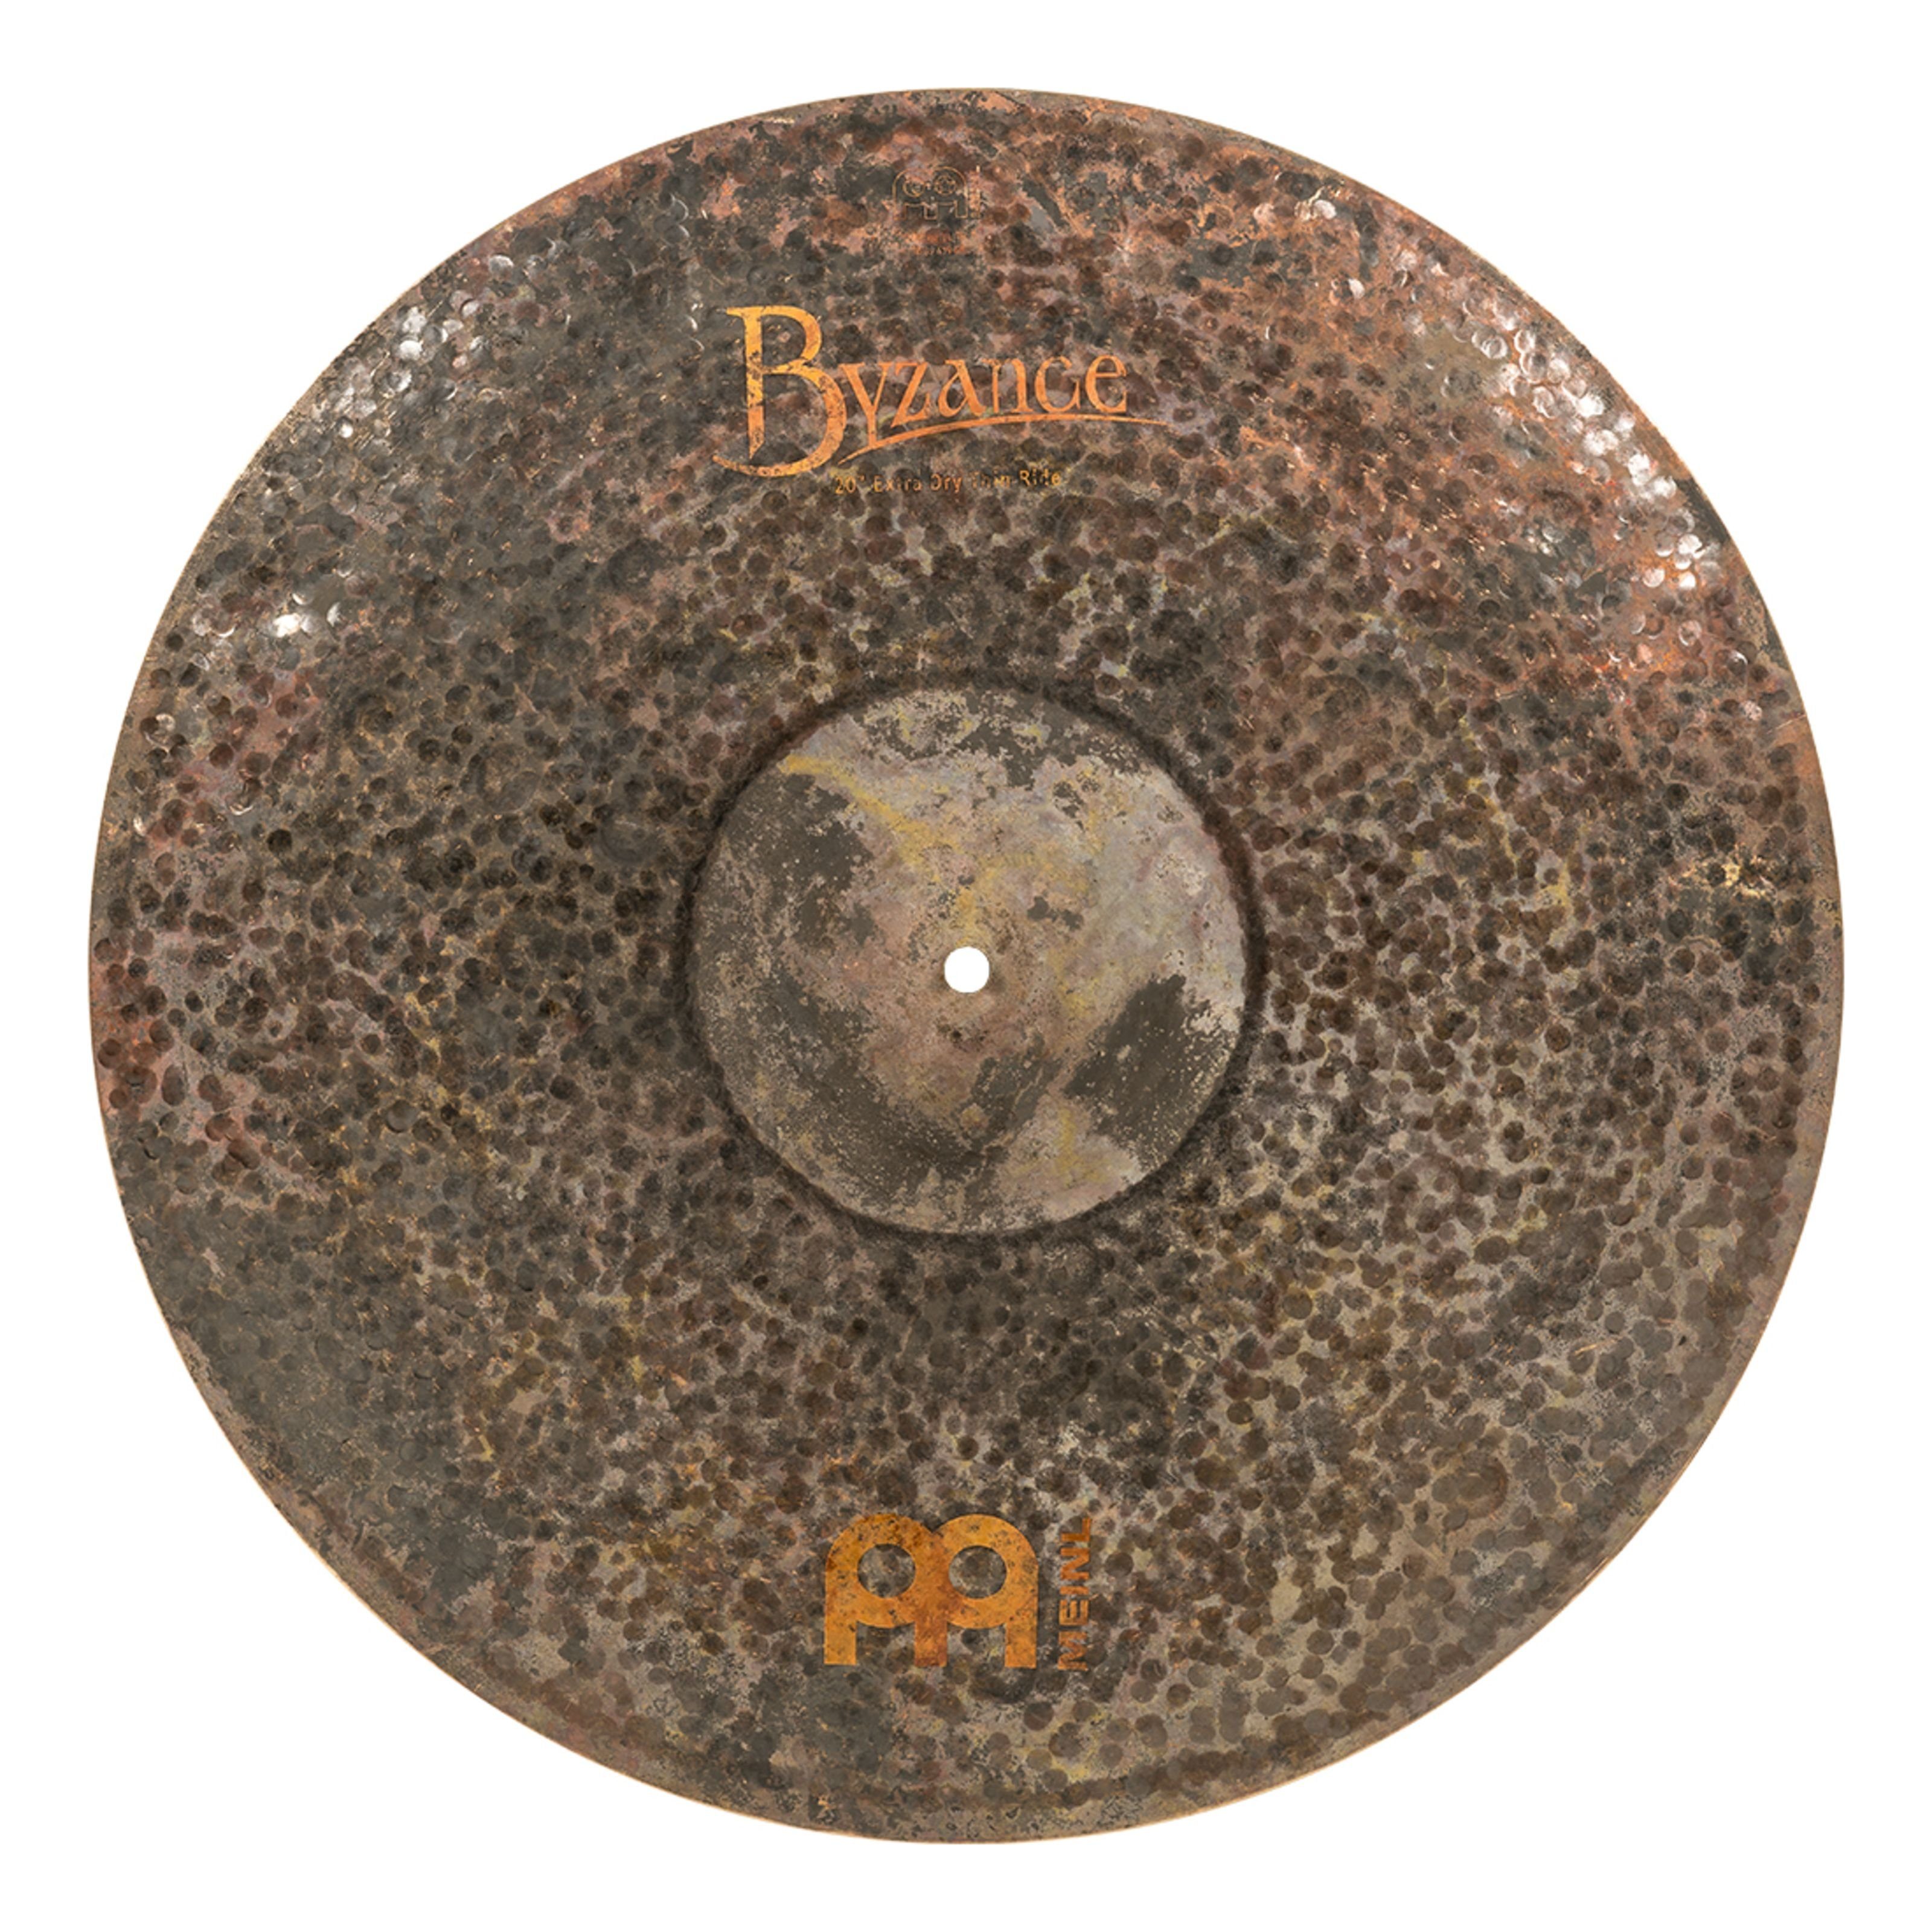 Meinl Percussion Spielzeug-Musikinstrument, Cymbal 20", Dry Byzance - Extra B20EDTR, Ride Thin Ride